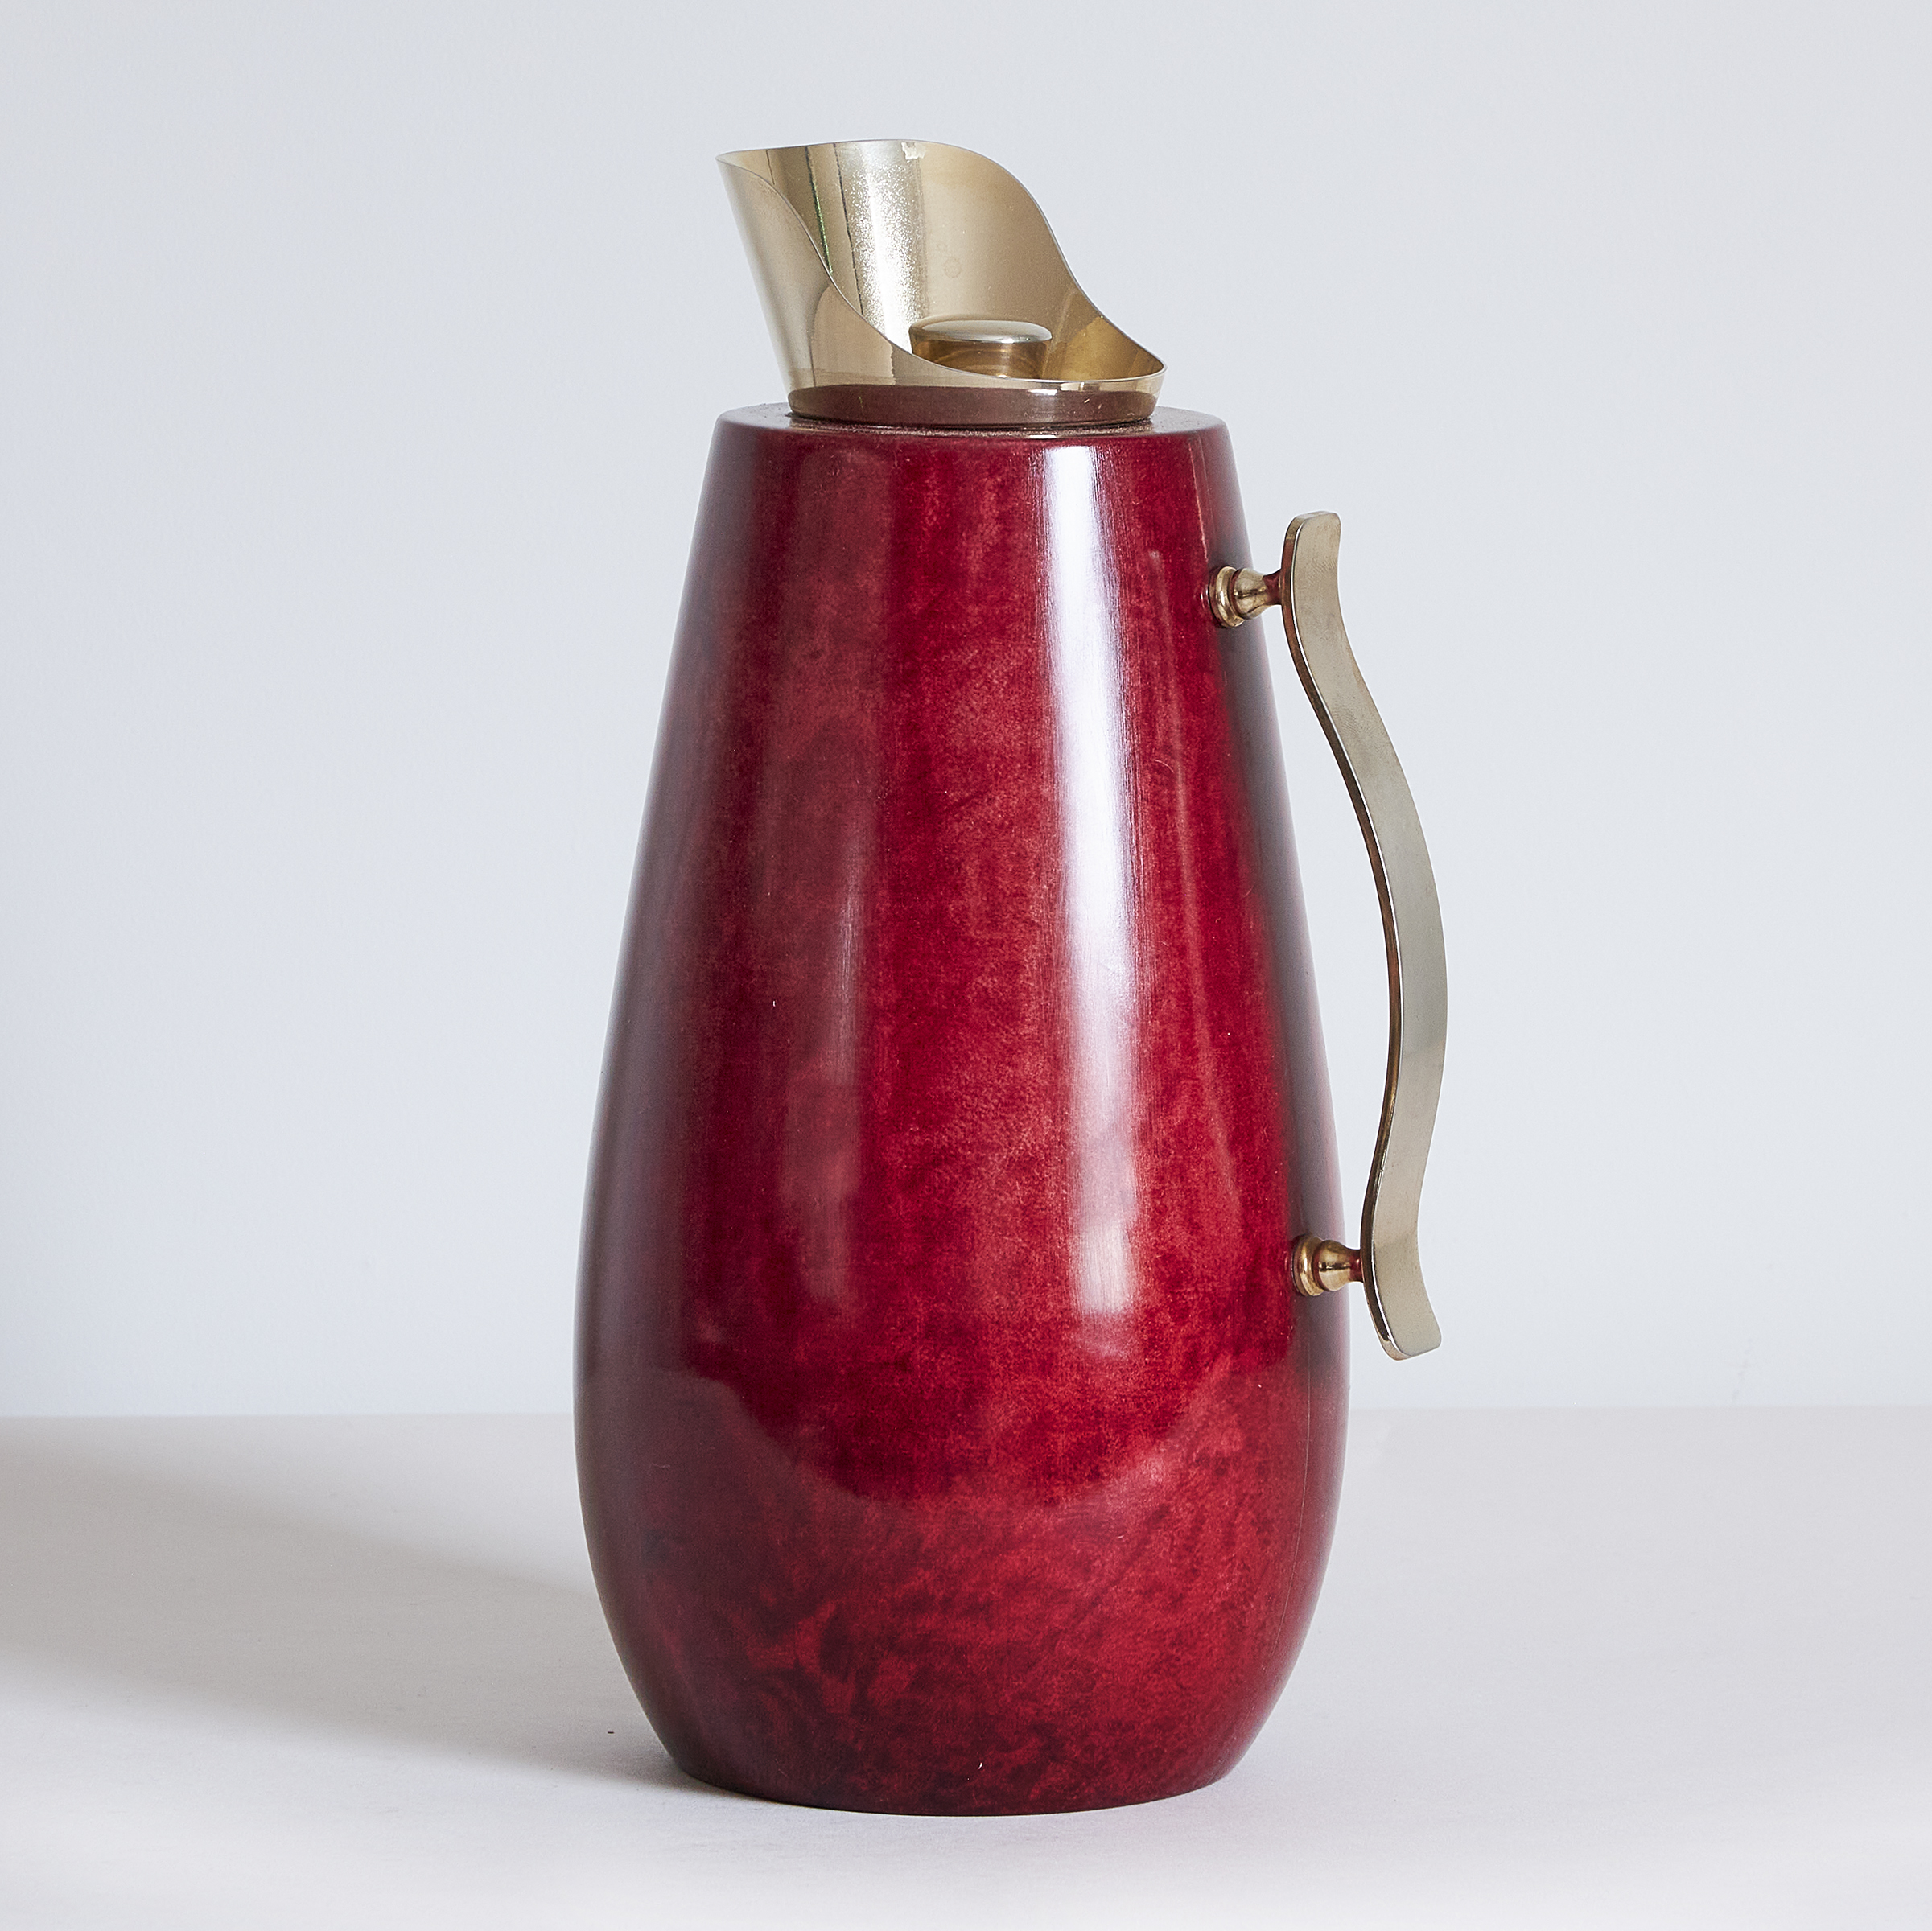 Aldo Tura oxblood lacquered flask, 1960s - BEAR Petworth